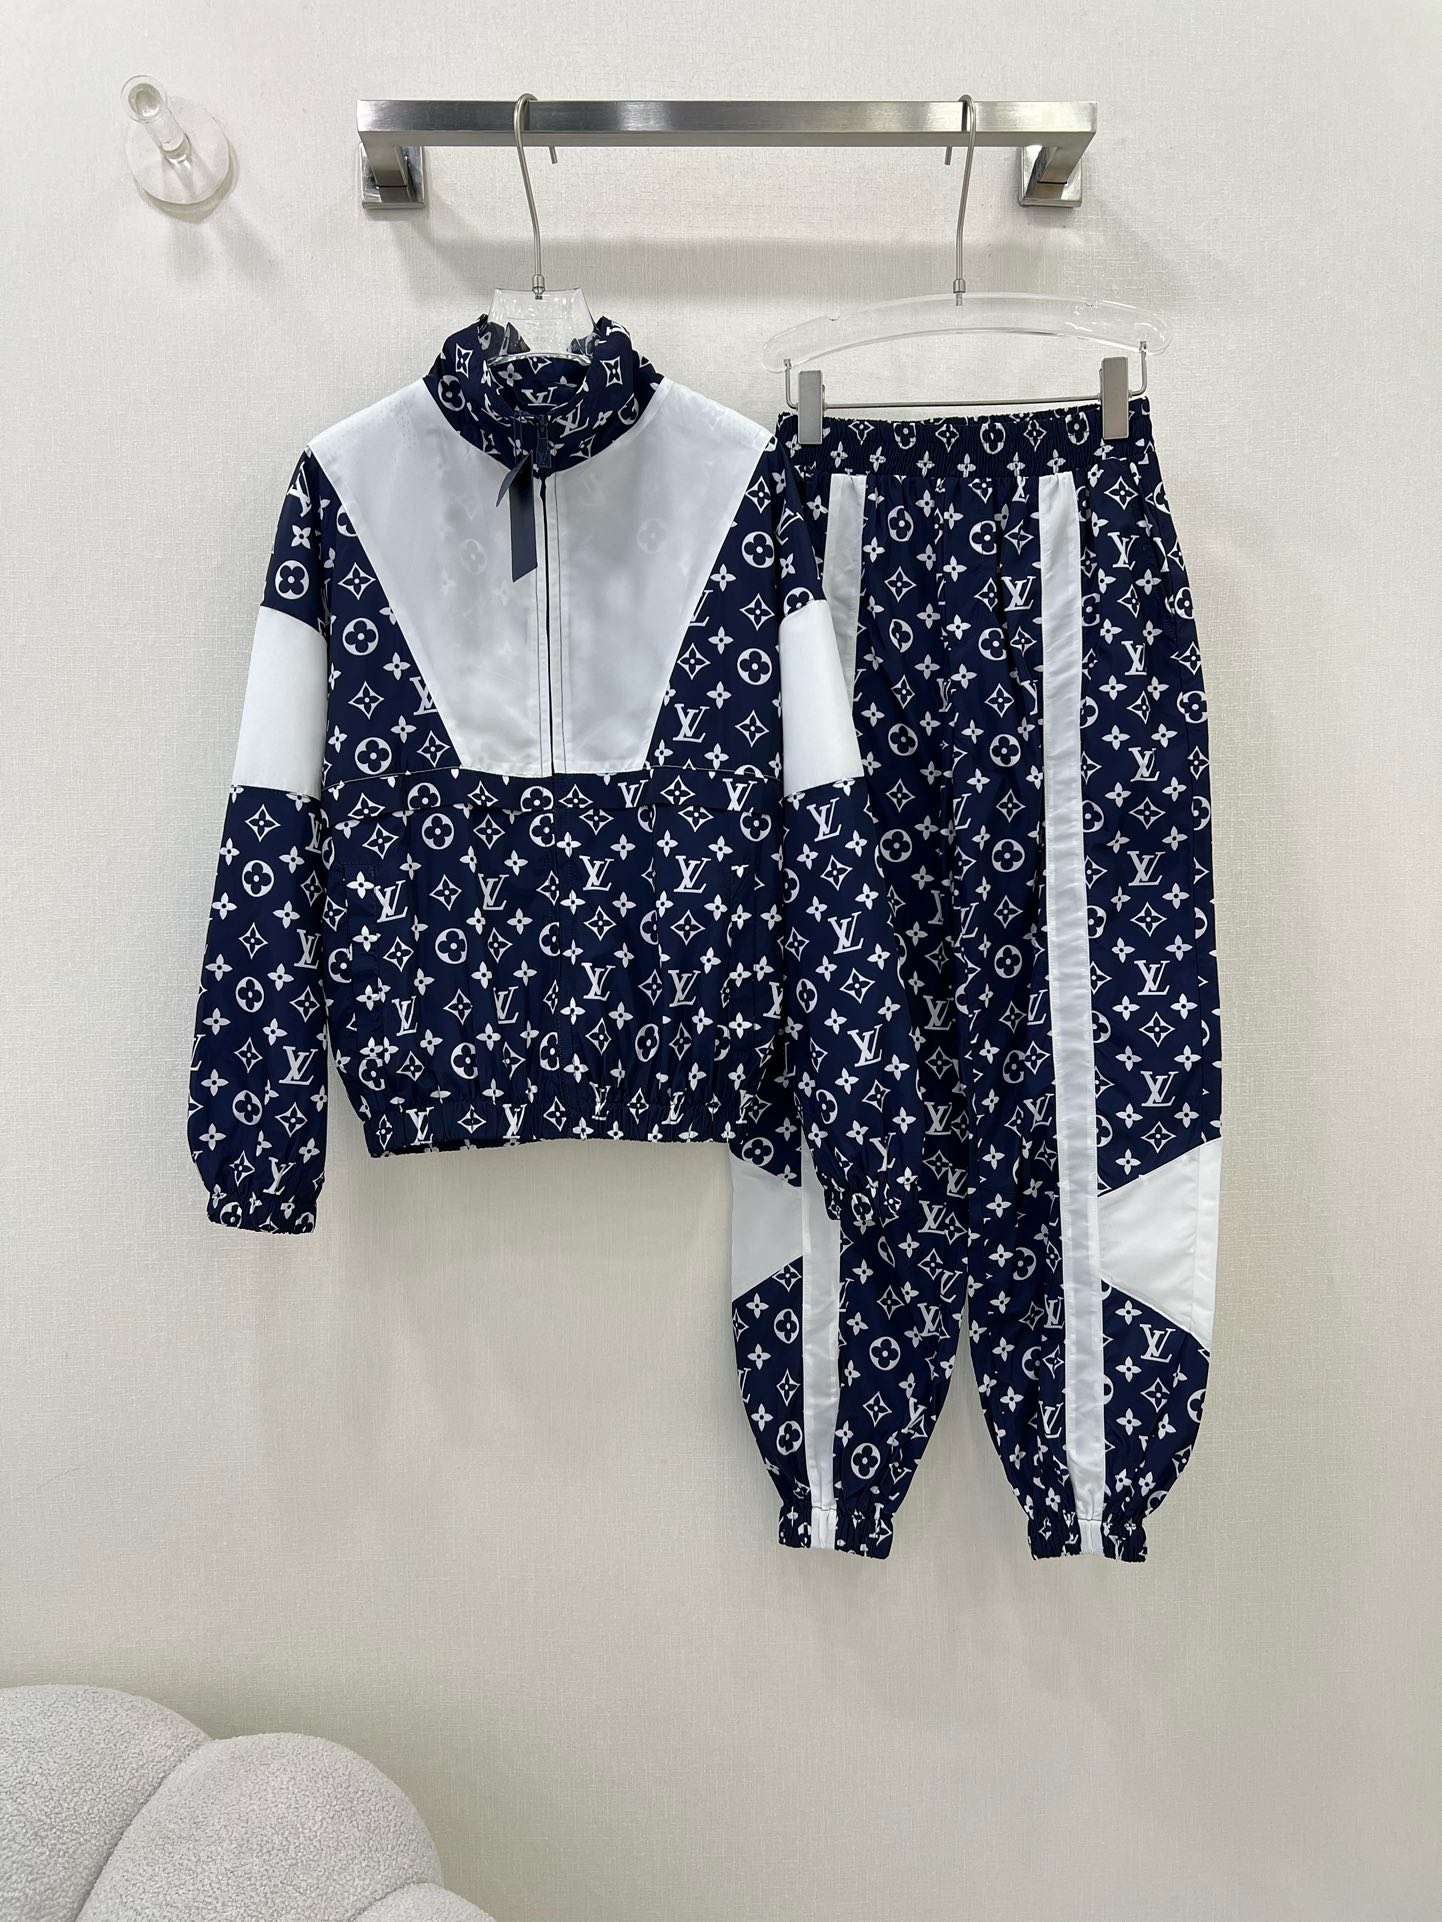 Louis Vuitton Coats & Jackets Sun Protection Clothing Printing Summer Collection Leggings